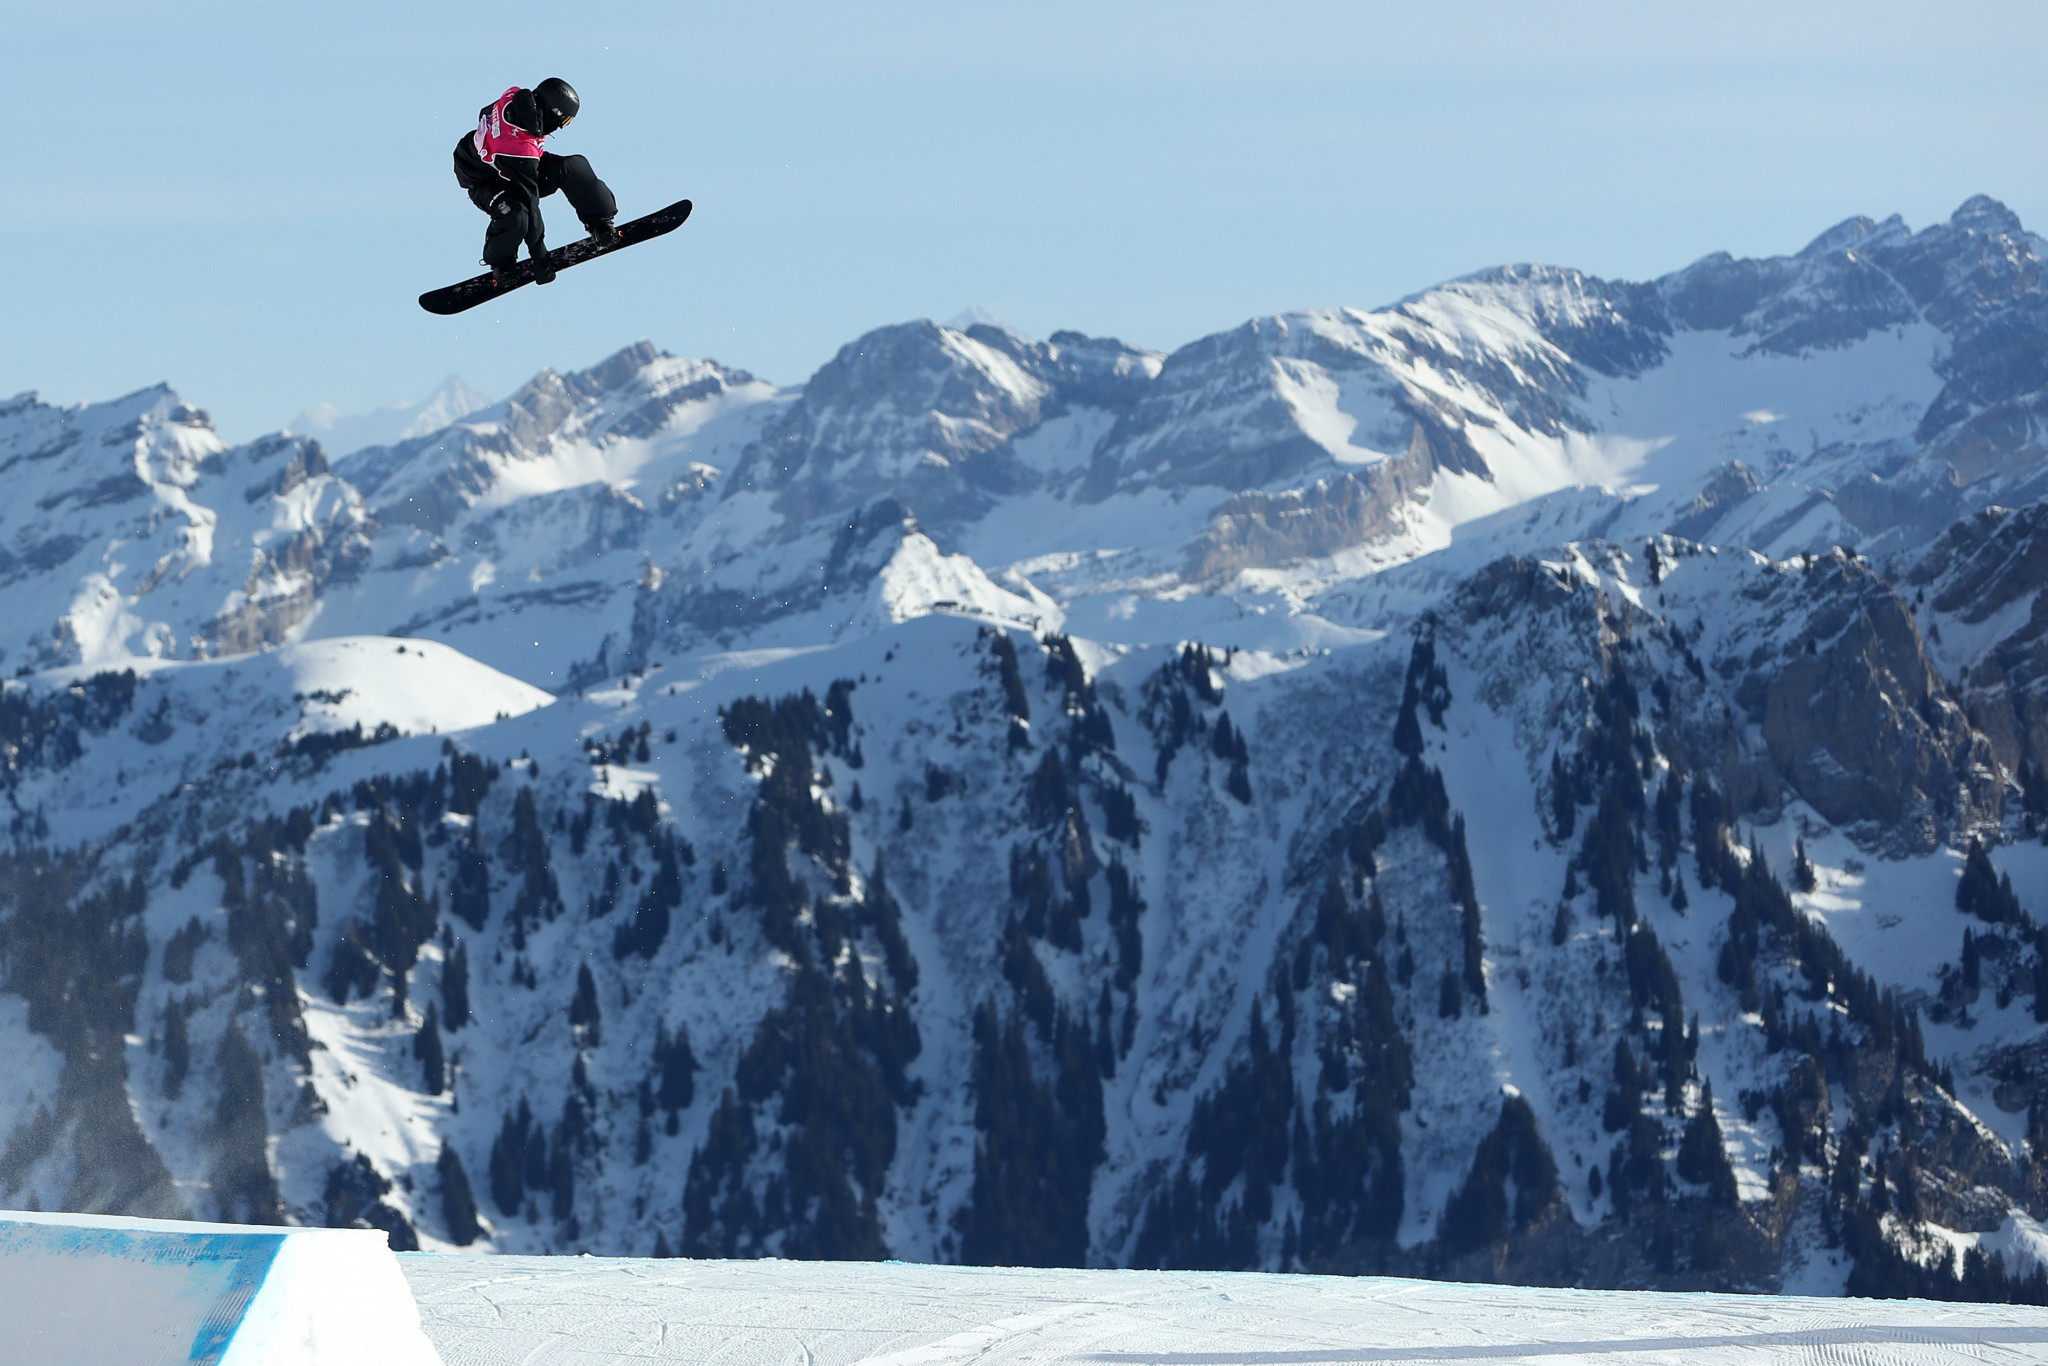 Park and Pipe Junior World Championships set to take place over next week in Leysin